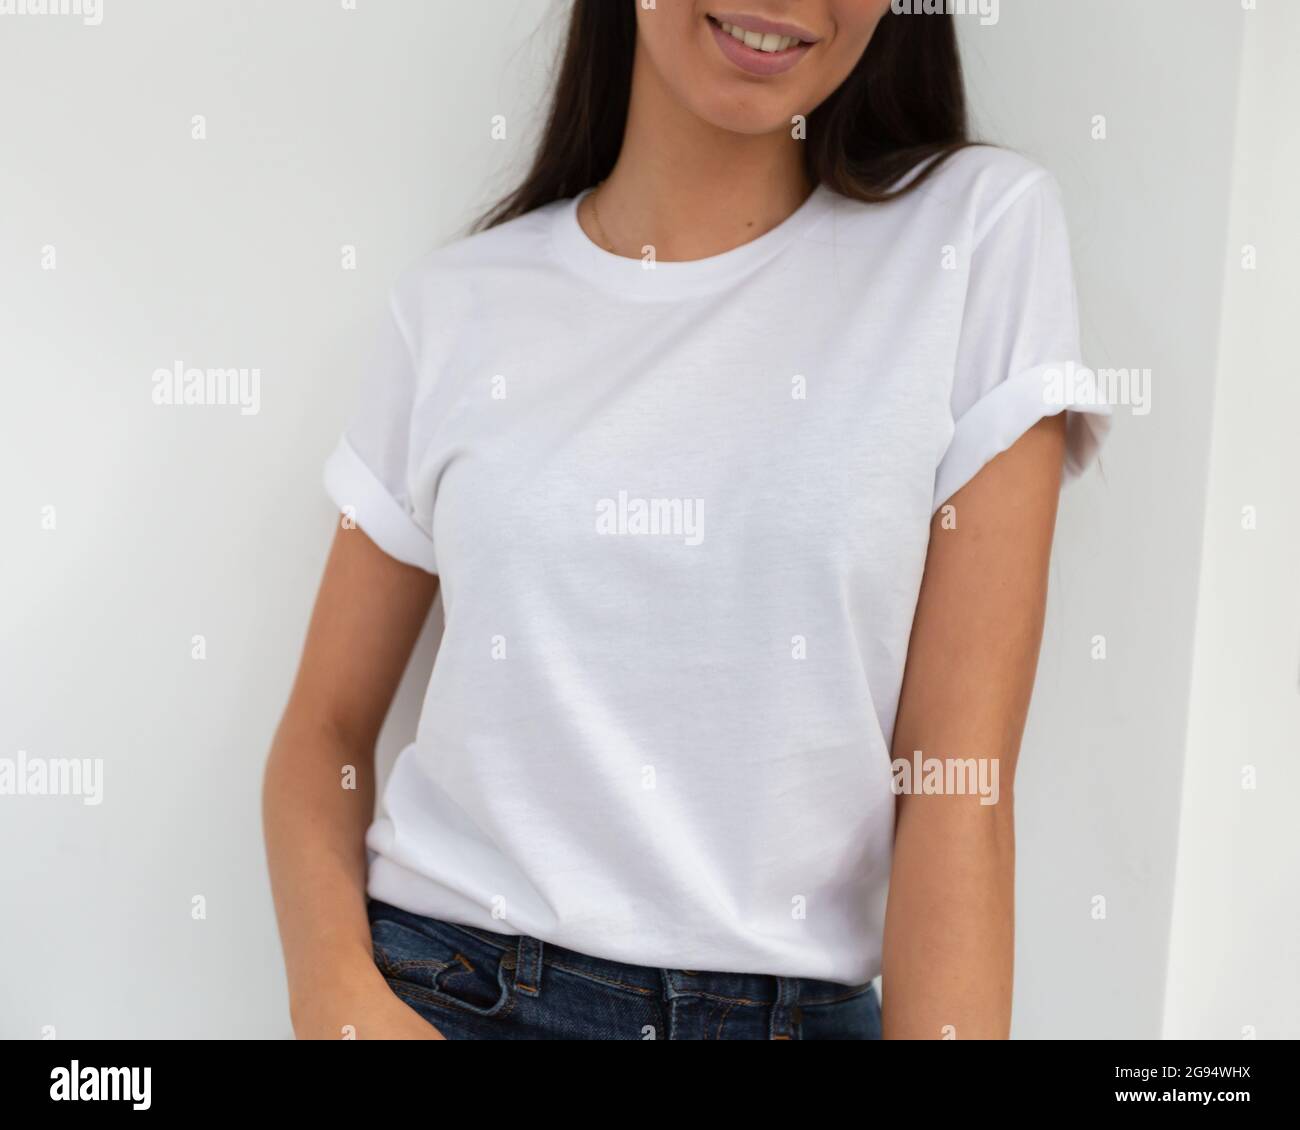 Tshirt mockup, front view of unrecognizable woman wearing white tshirt.  Copy space on empty area on her t-shirt for design or inscription. Fashion  lifestyle mock up of white tshirt. T-shirt template Stock